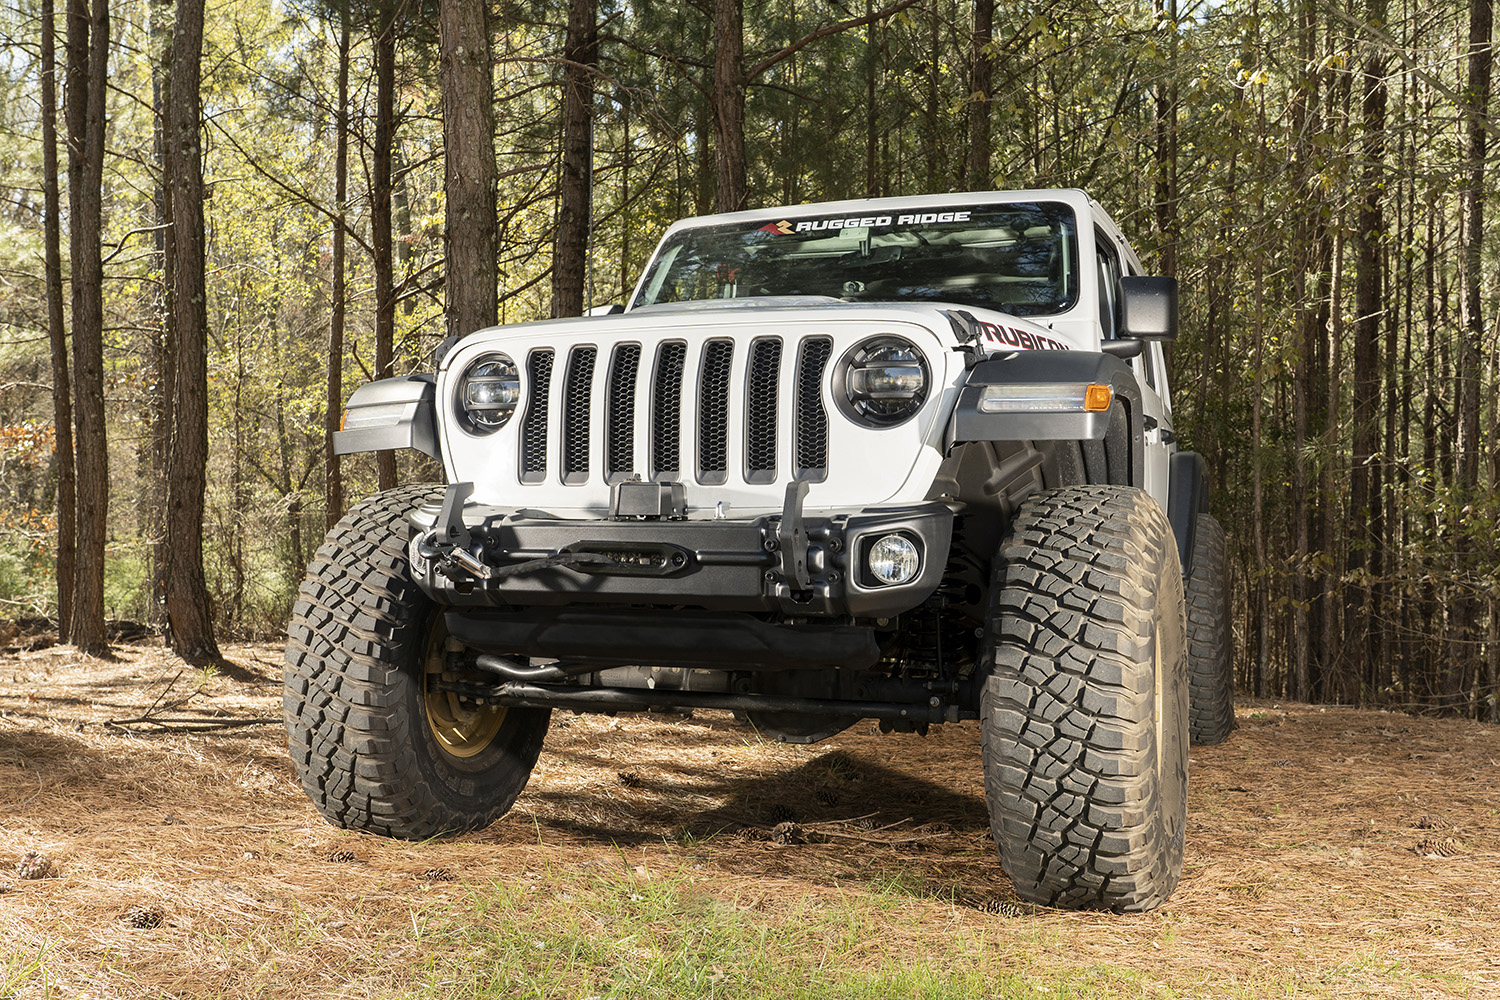 Arcus Front Stubby Bumper for 2018-â€˜19 Wrangler JL/JLU models by Rugged Ridge.